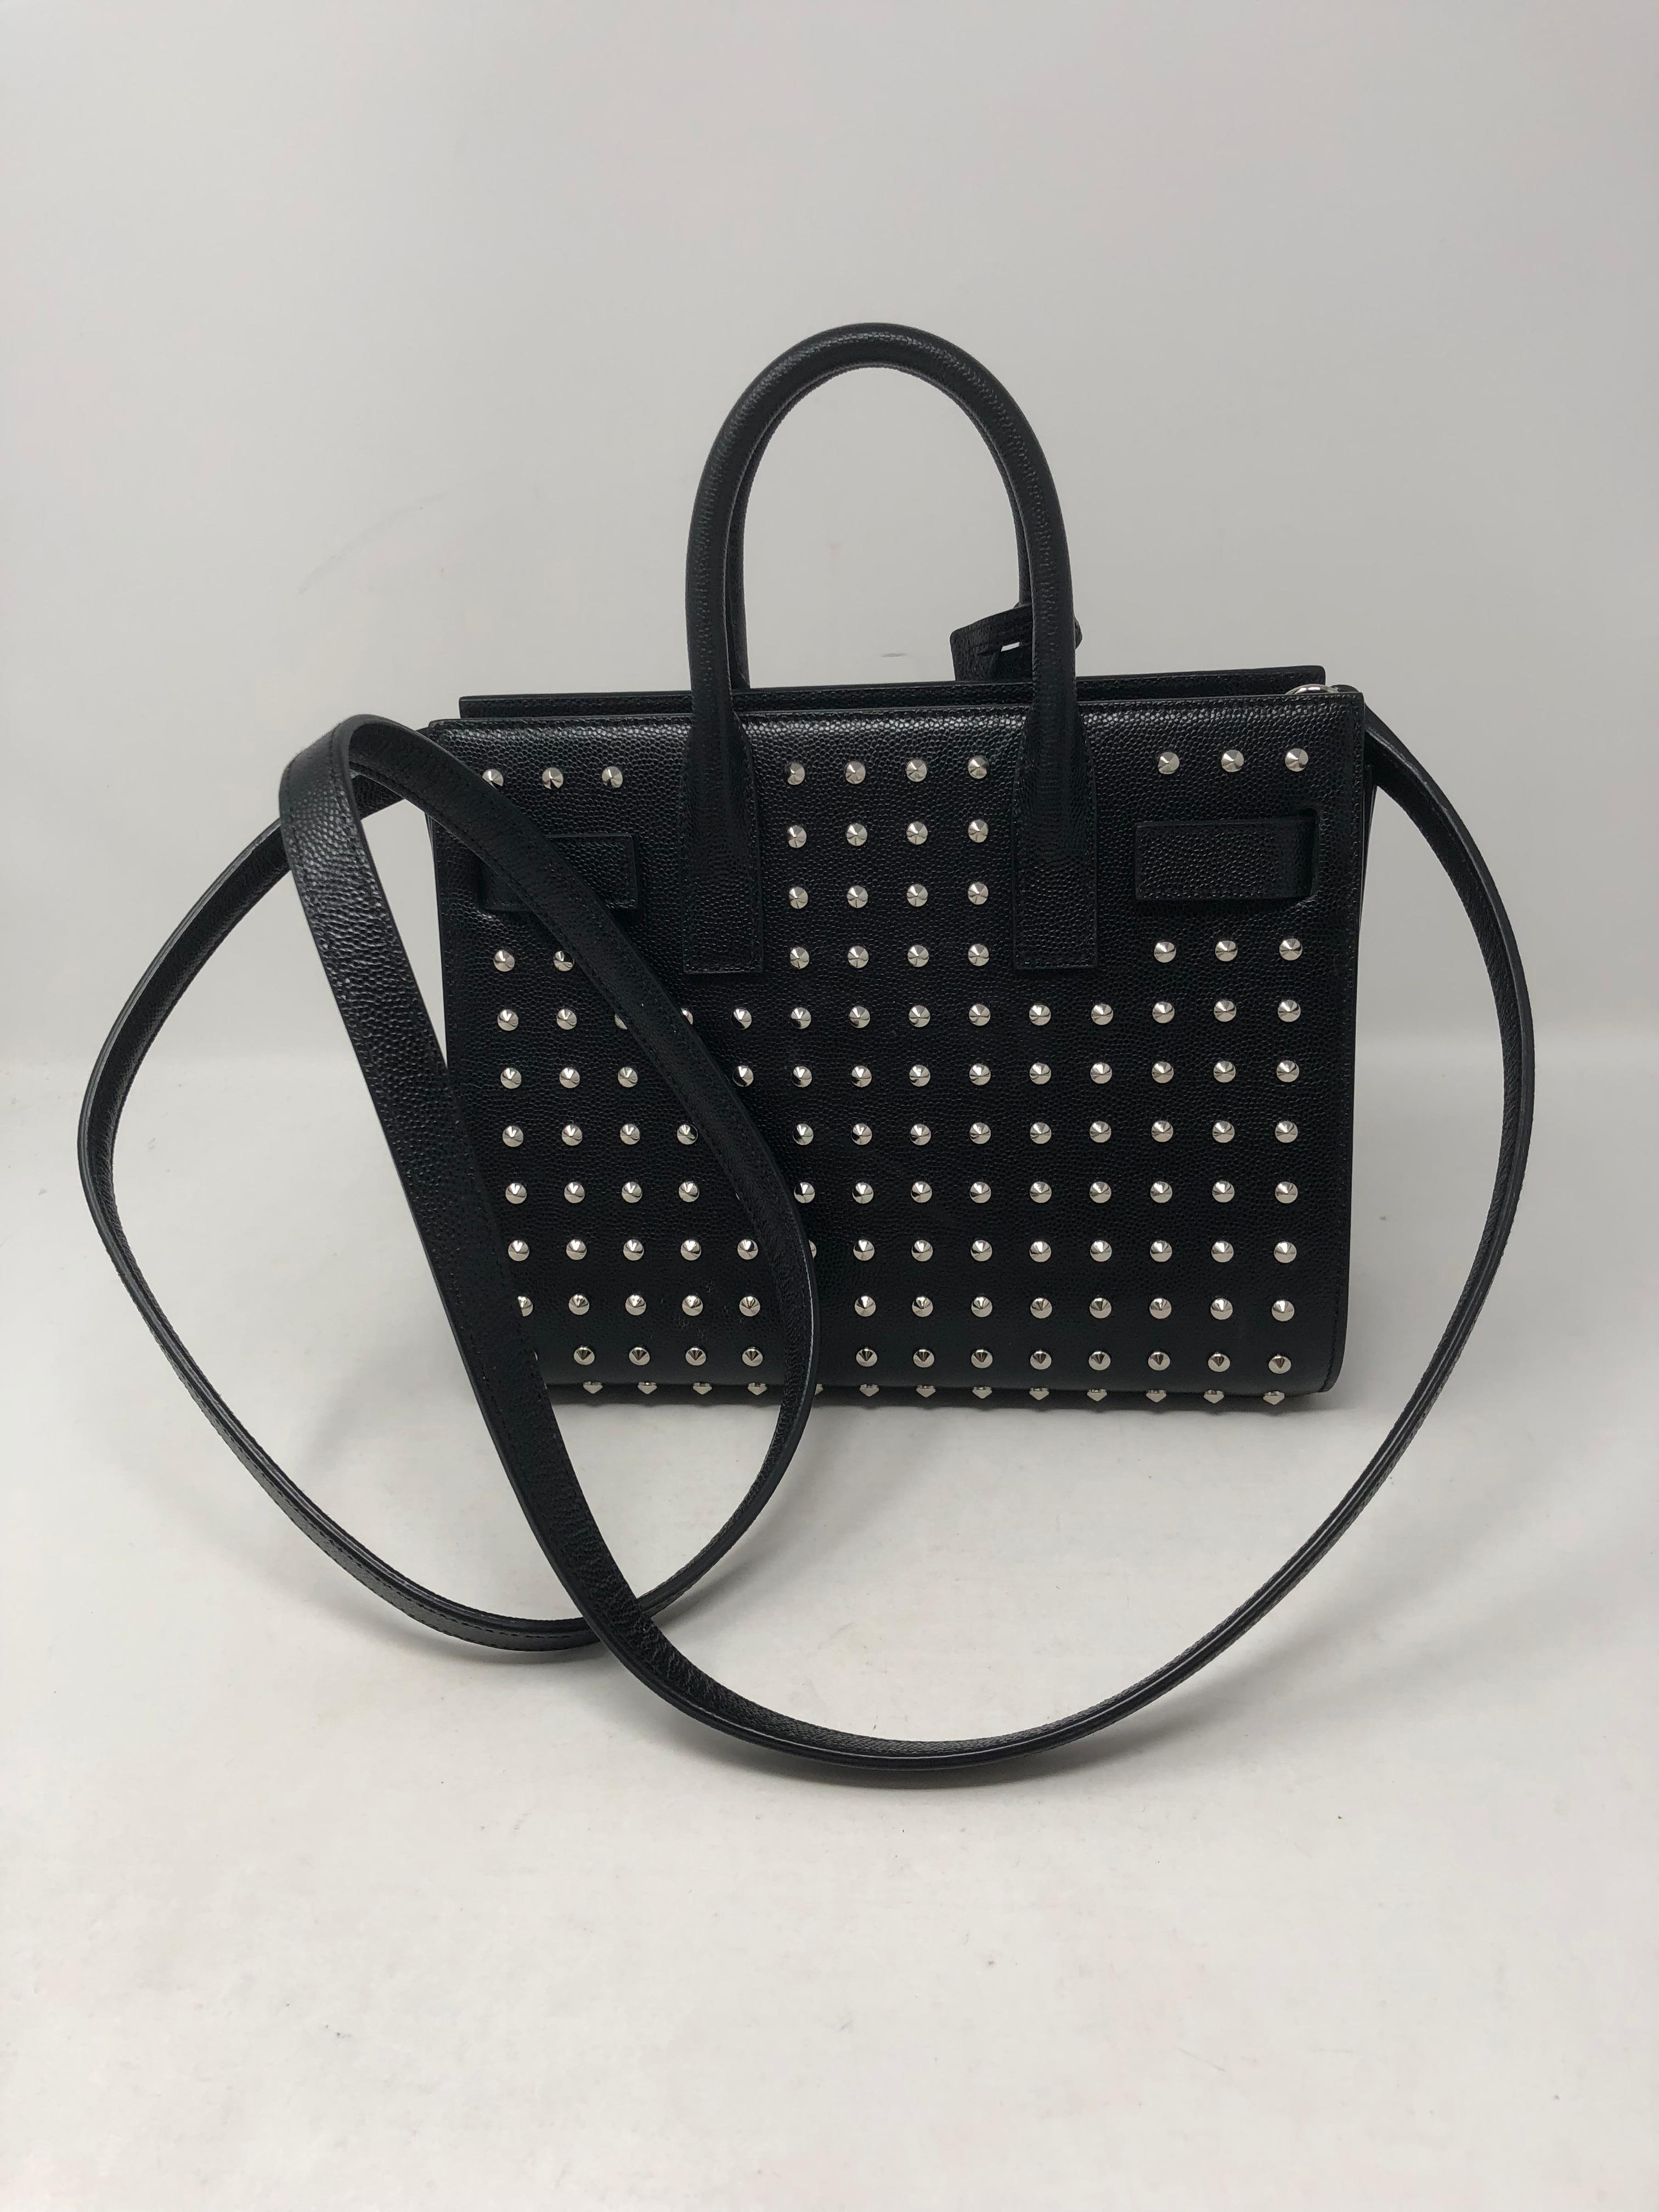 Yves Saint Laurent Black Studded Nano Sac Du Jour Bag. Like new condition, never worn. This stunning bag can be worn crossbody or as a shoulder bag. The strap is detchable too. Guaranteed authentic. 